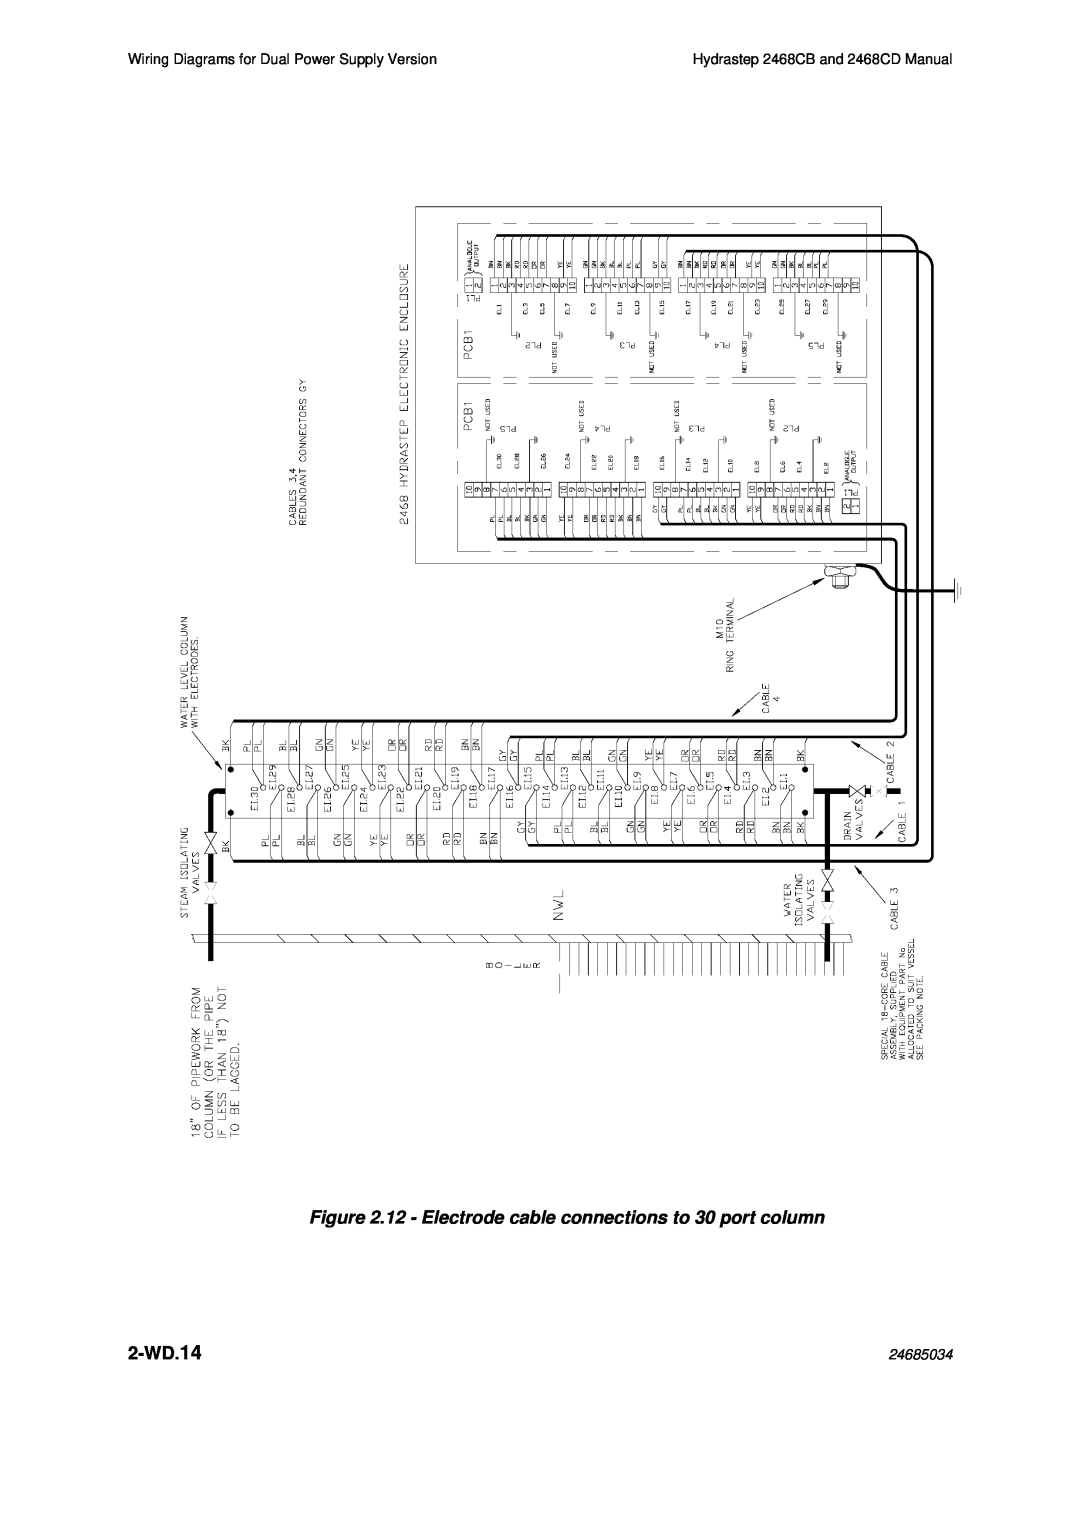 Emerson manual 2-WD.14, Wiring Diagrams for Dual Power Supply Version, Hydrastep 2468CB and 2468CD Manual, 24685034 